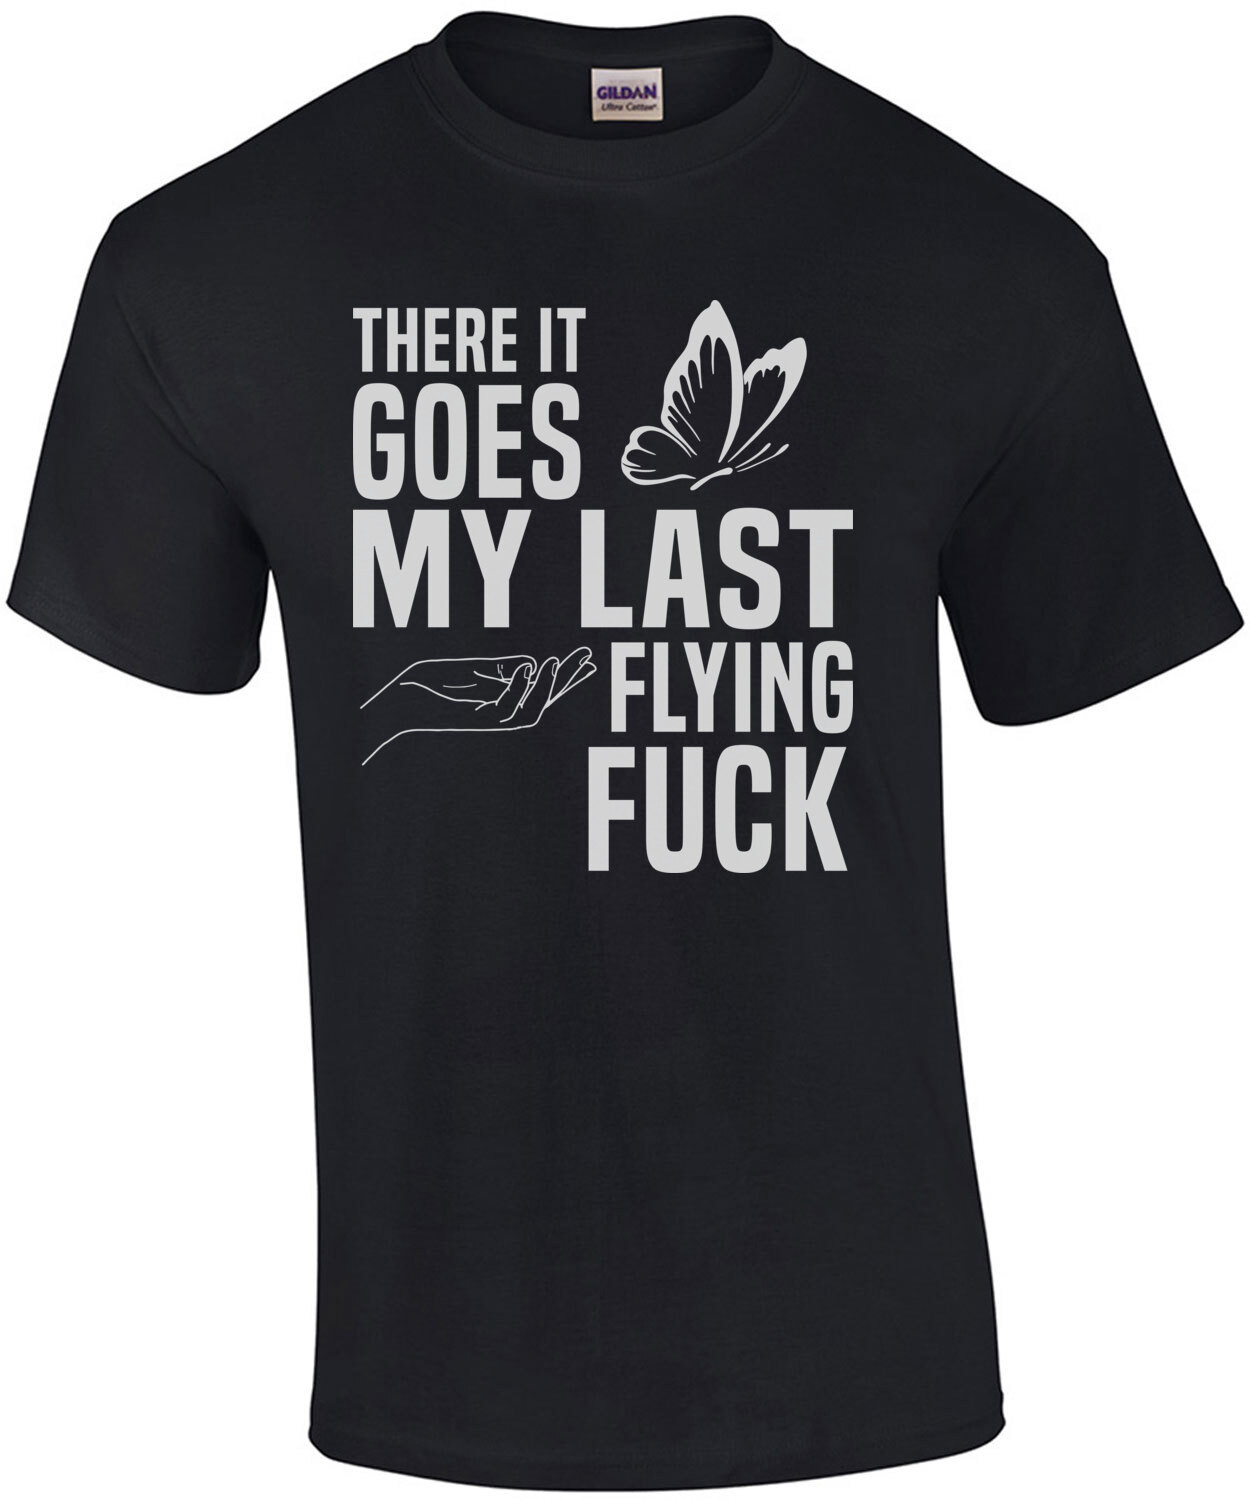 There it goes my last flying fuck - funny sarcastic t-shirt